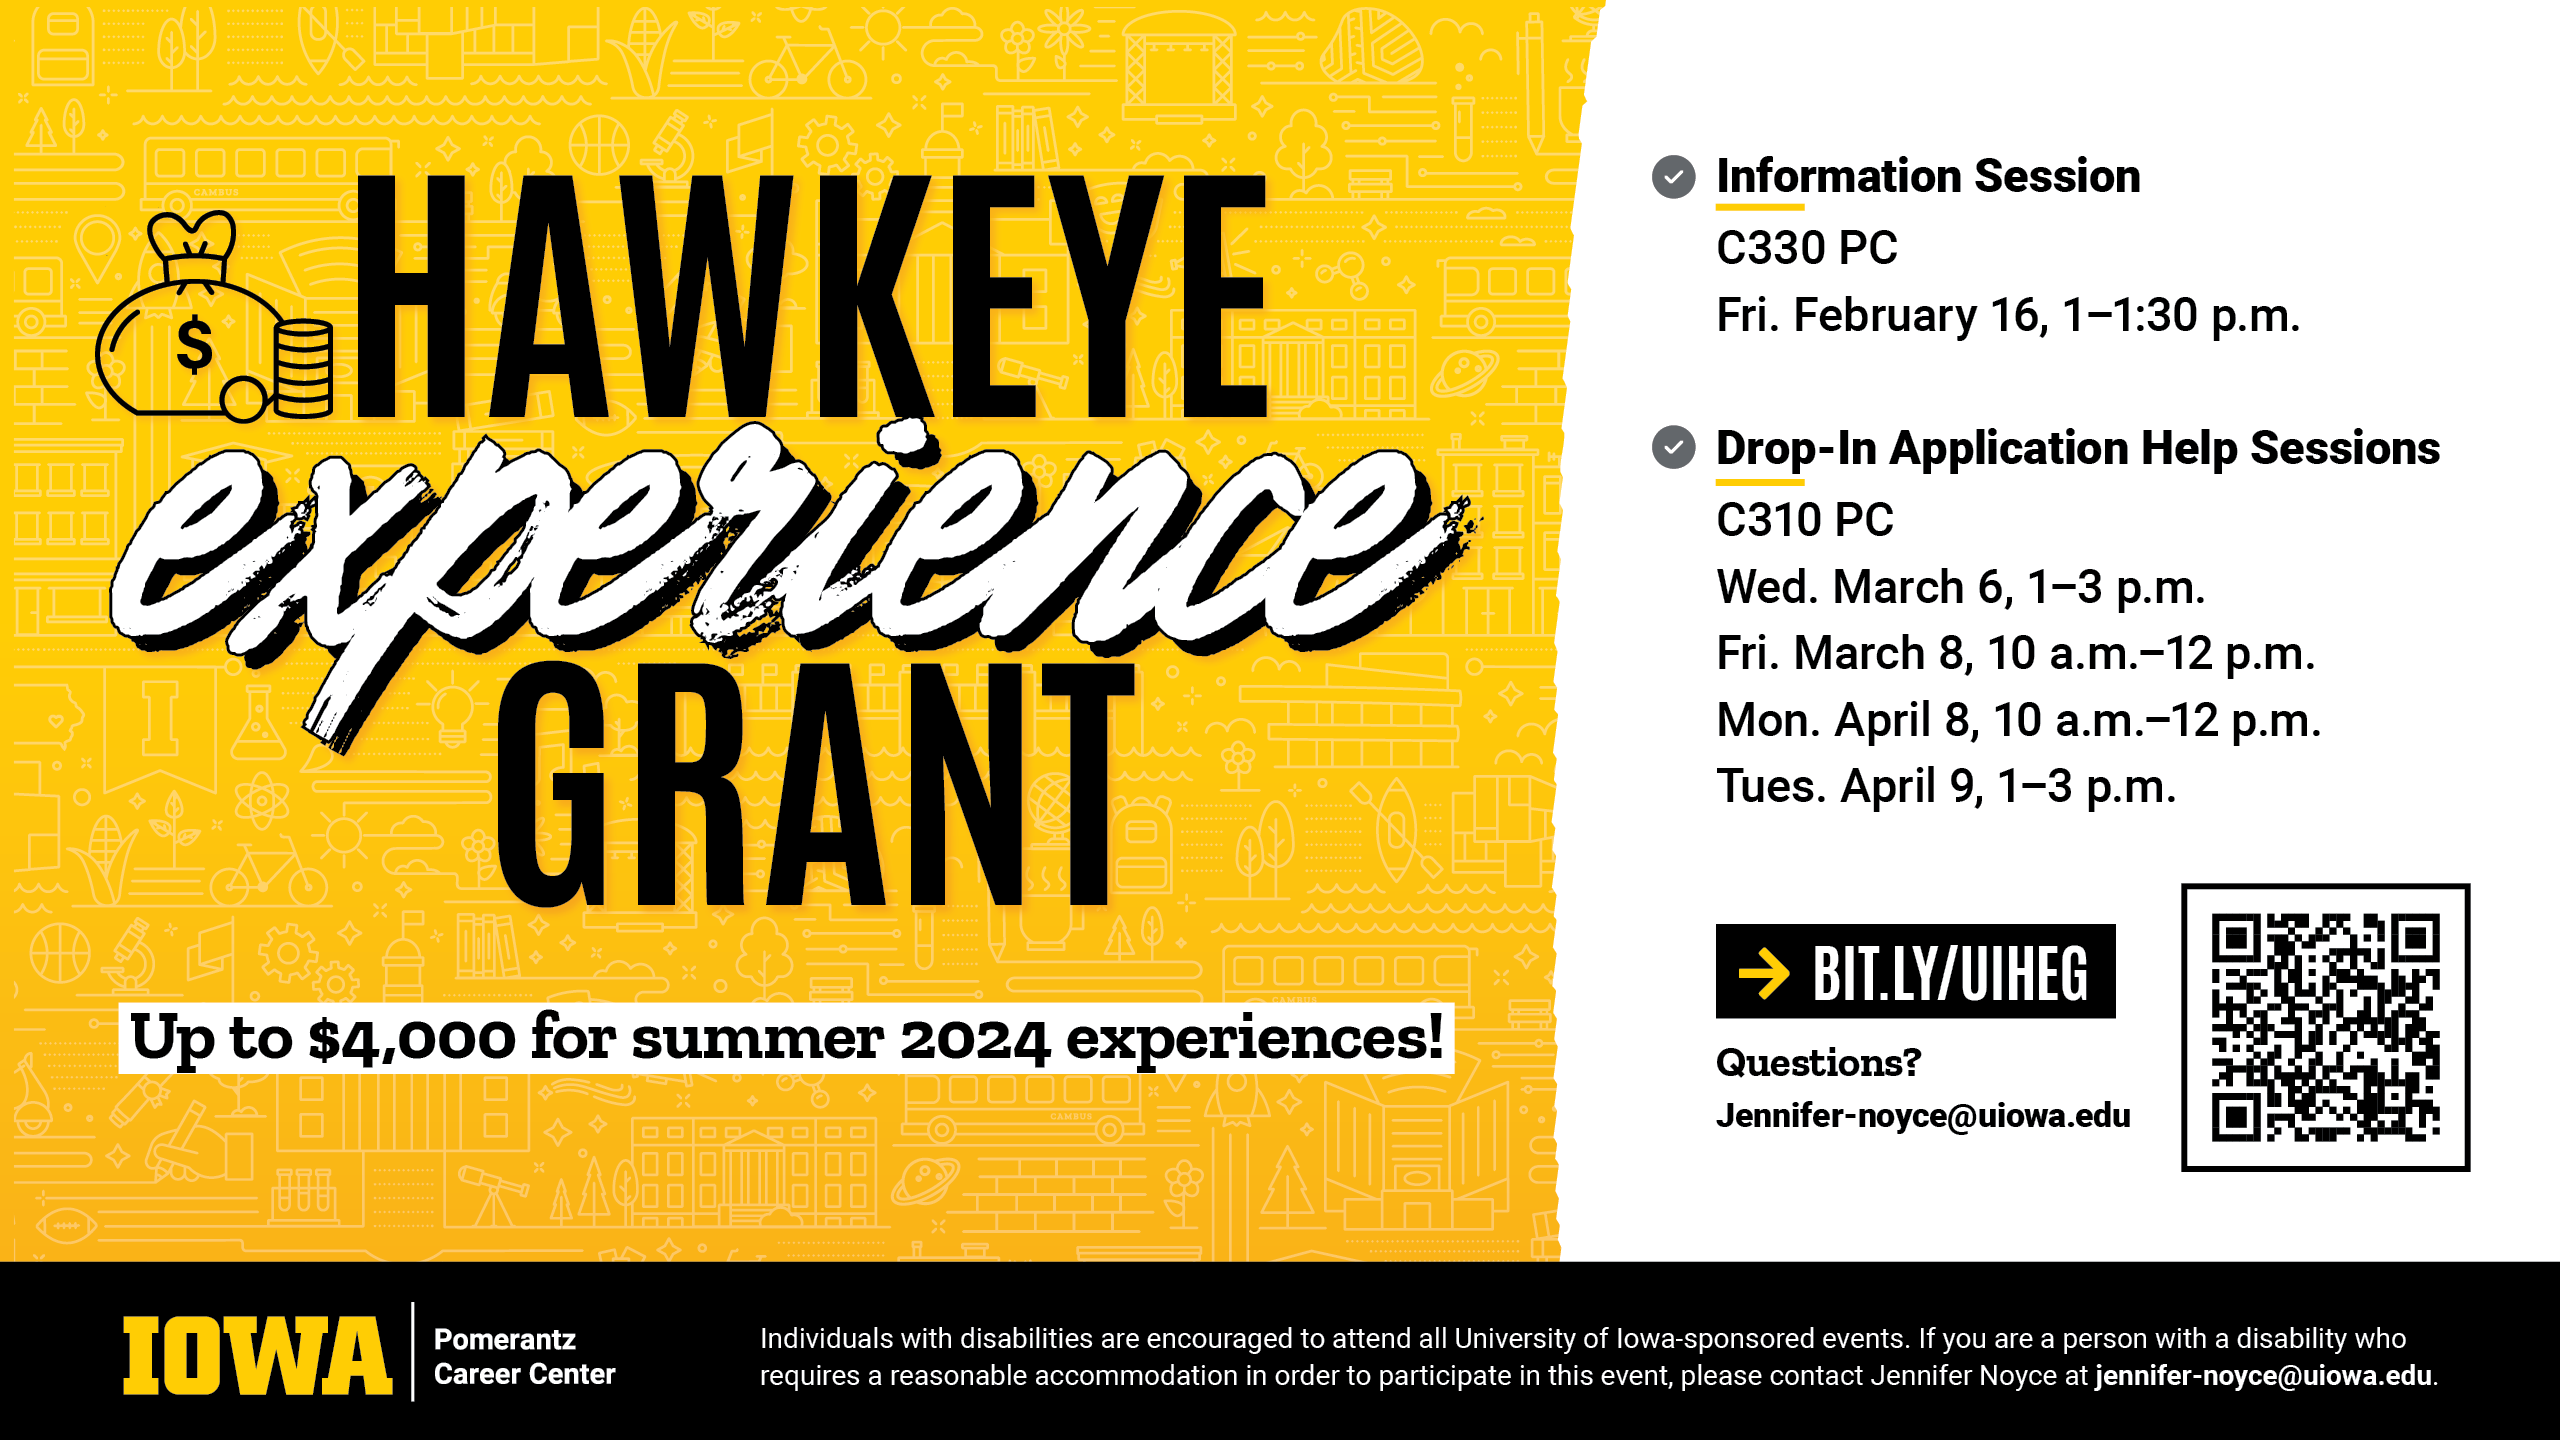 Hawkeye Experience Grant Help Sessions Scheduled for 2024